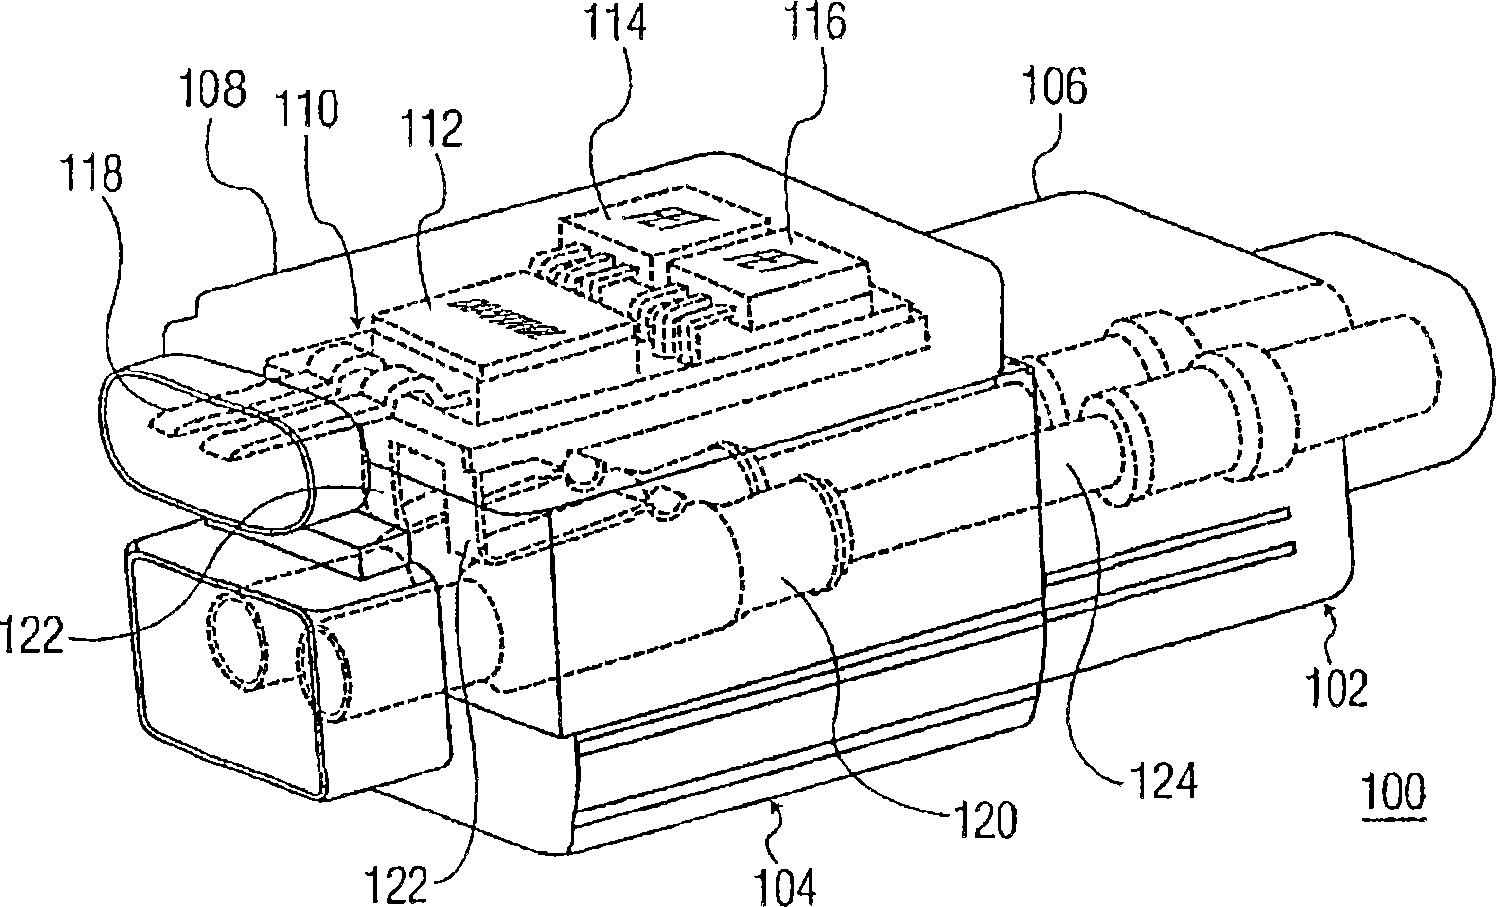 Apparatus and method to minimize arcing between electrical connectors